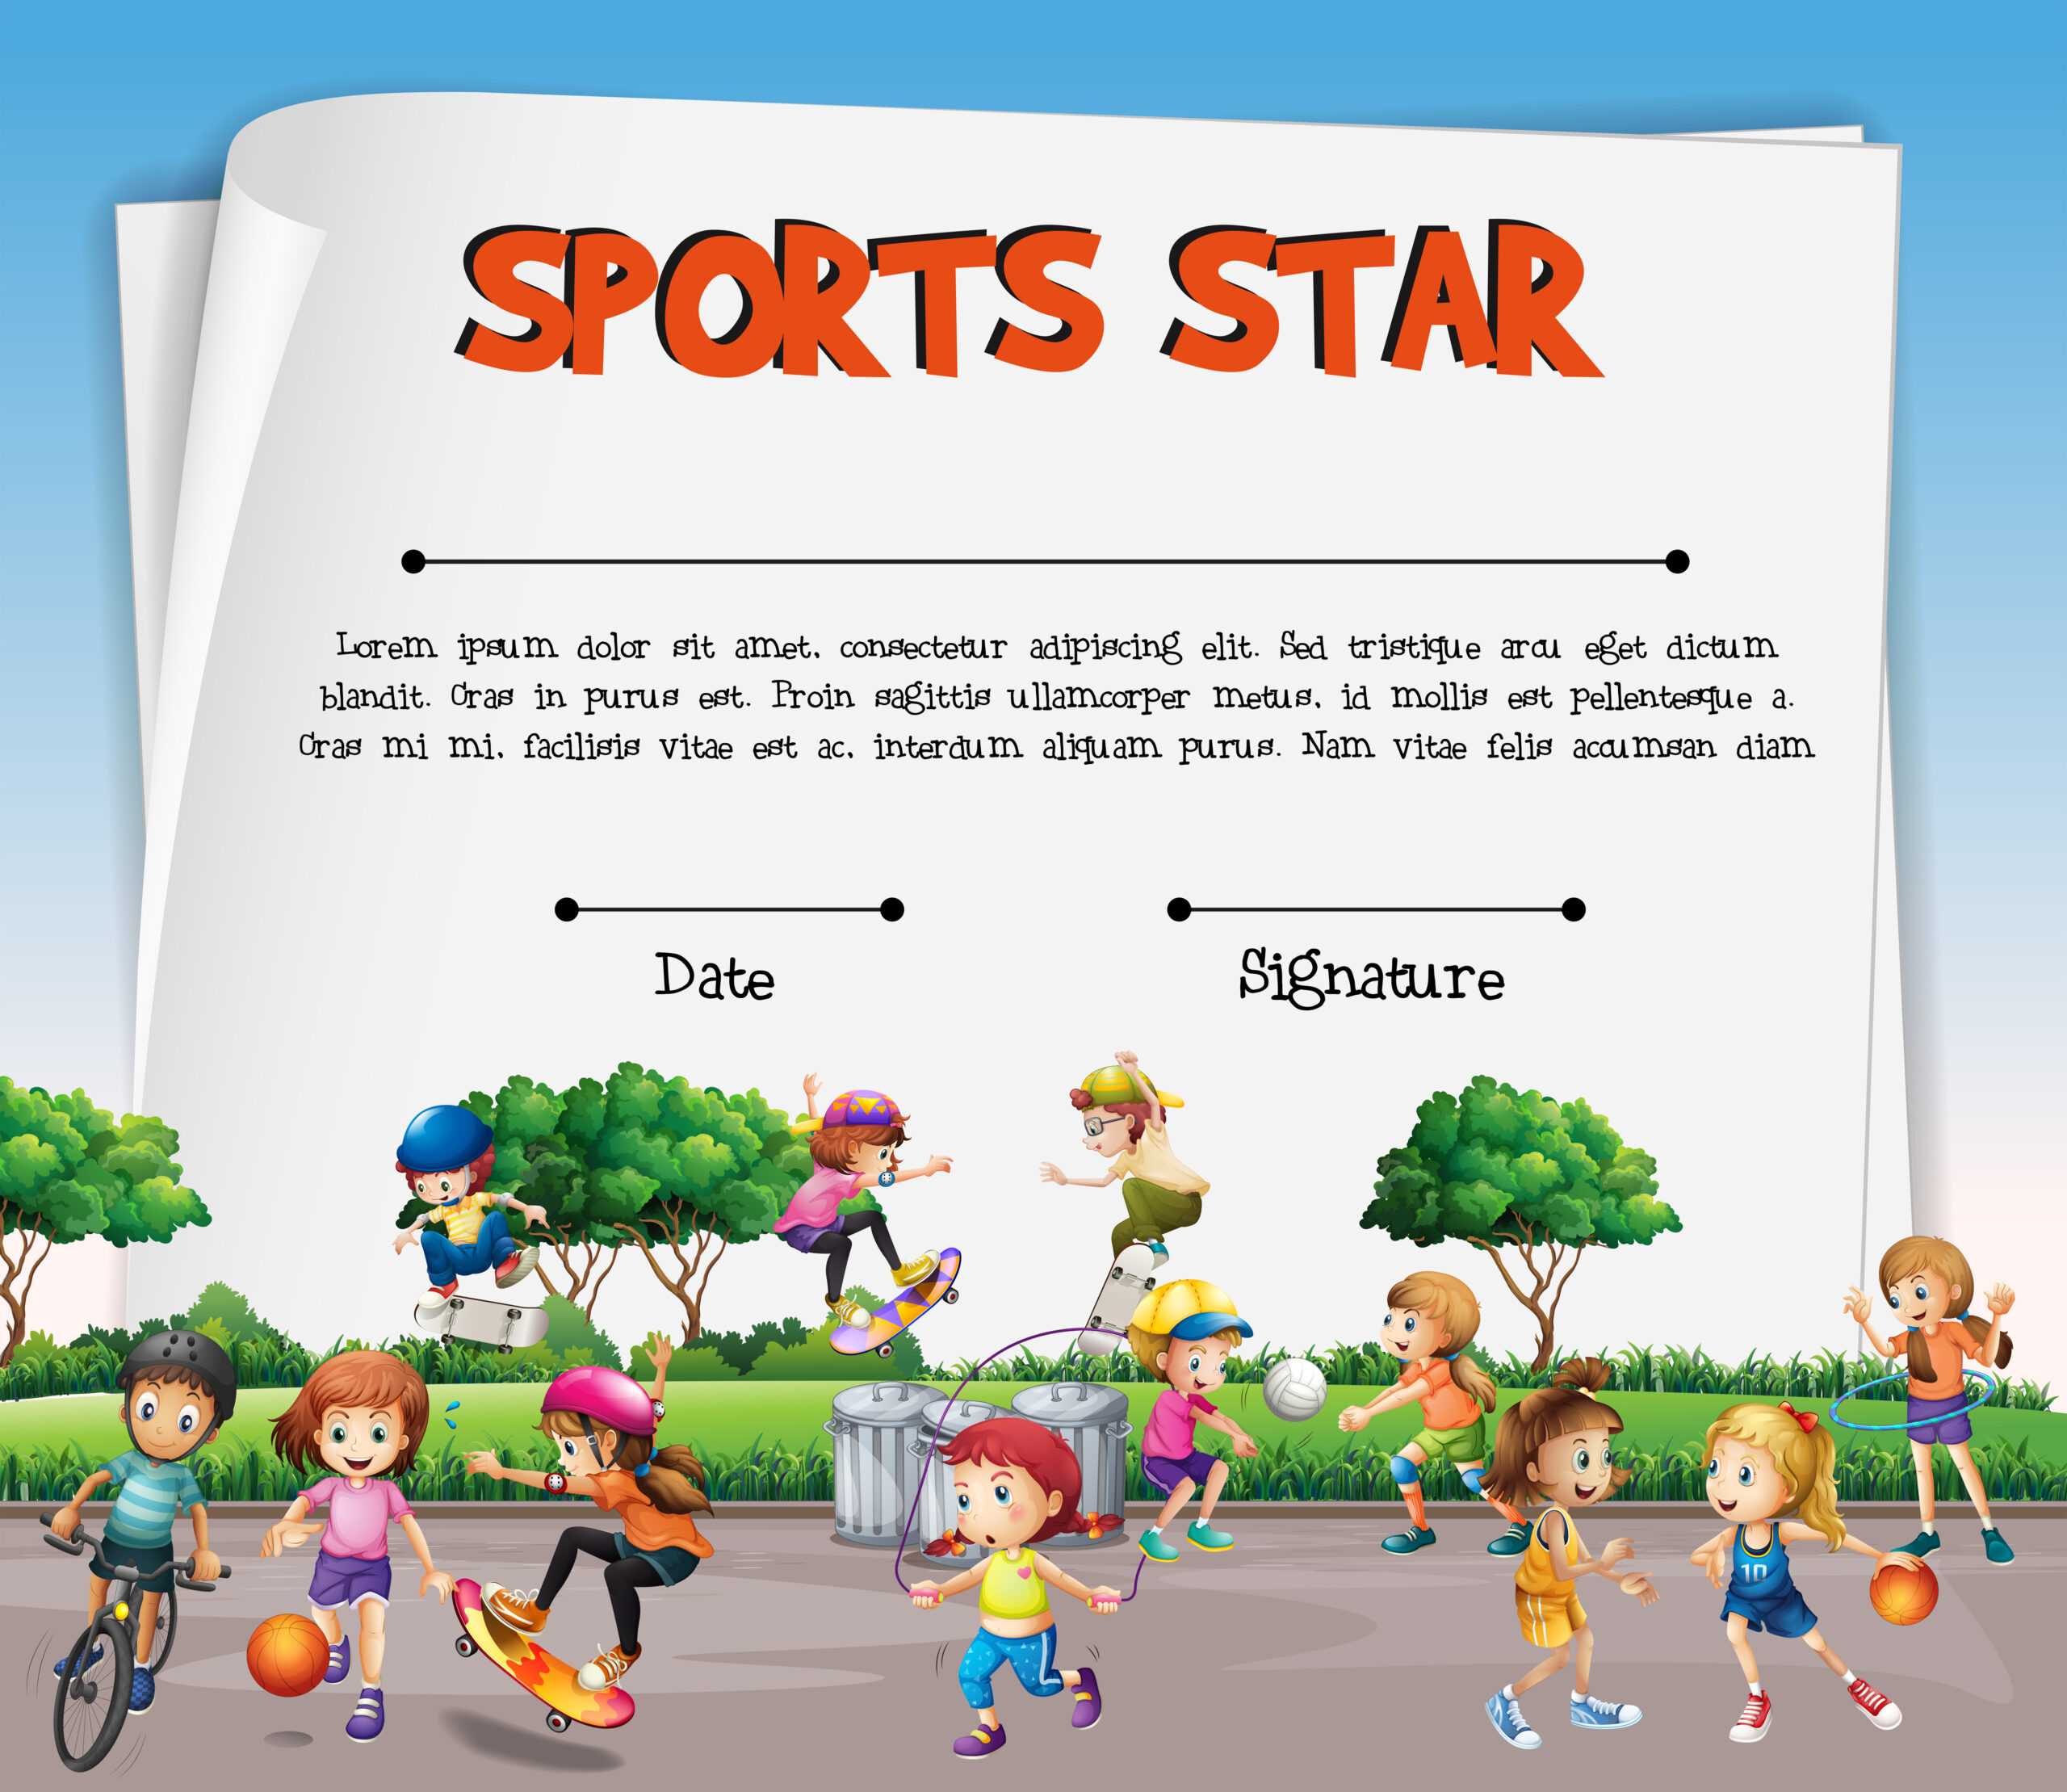 Sports Star Certificate Template With Kids Playing Sports For Star Award Certificate Template